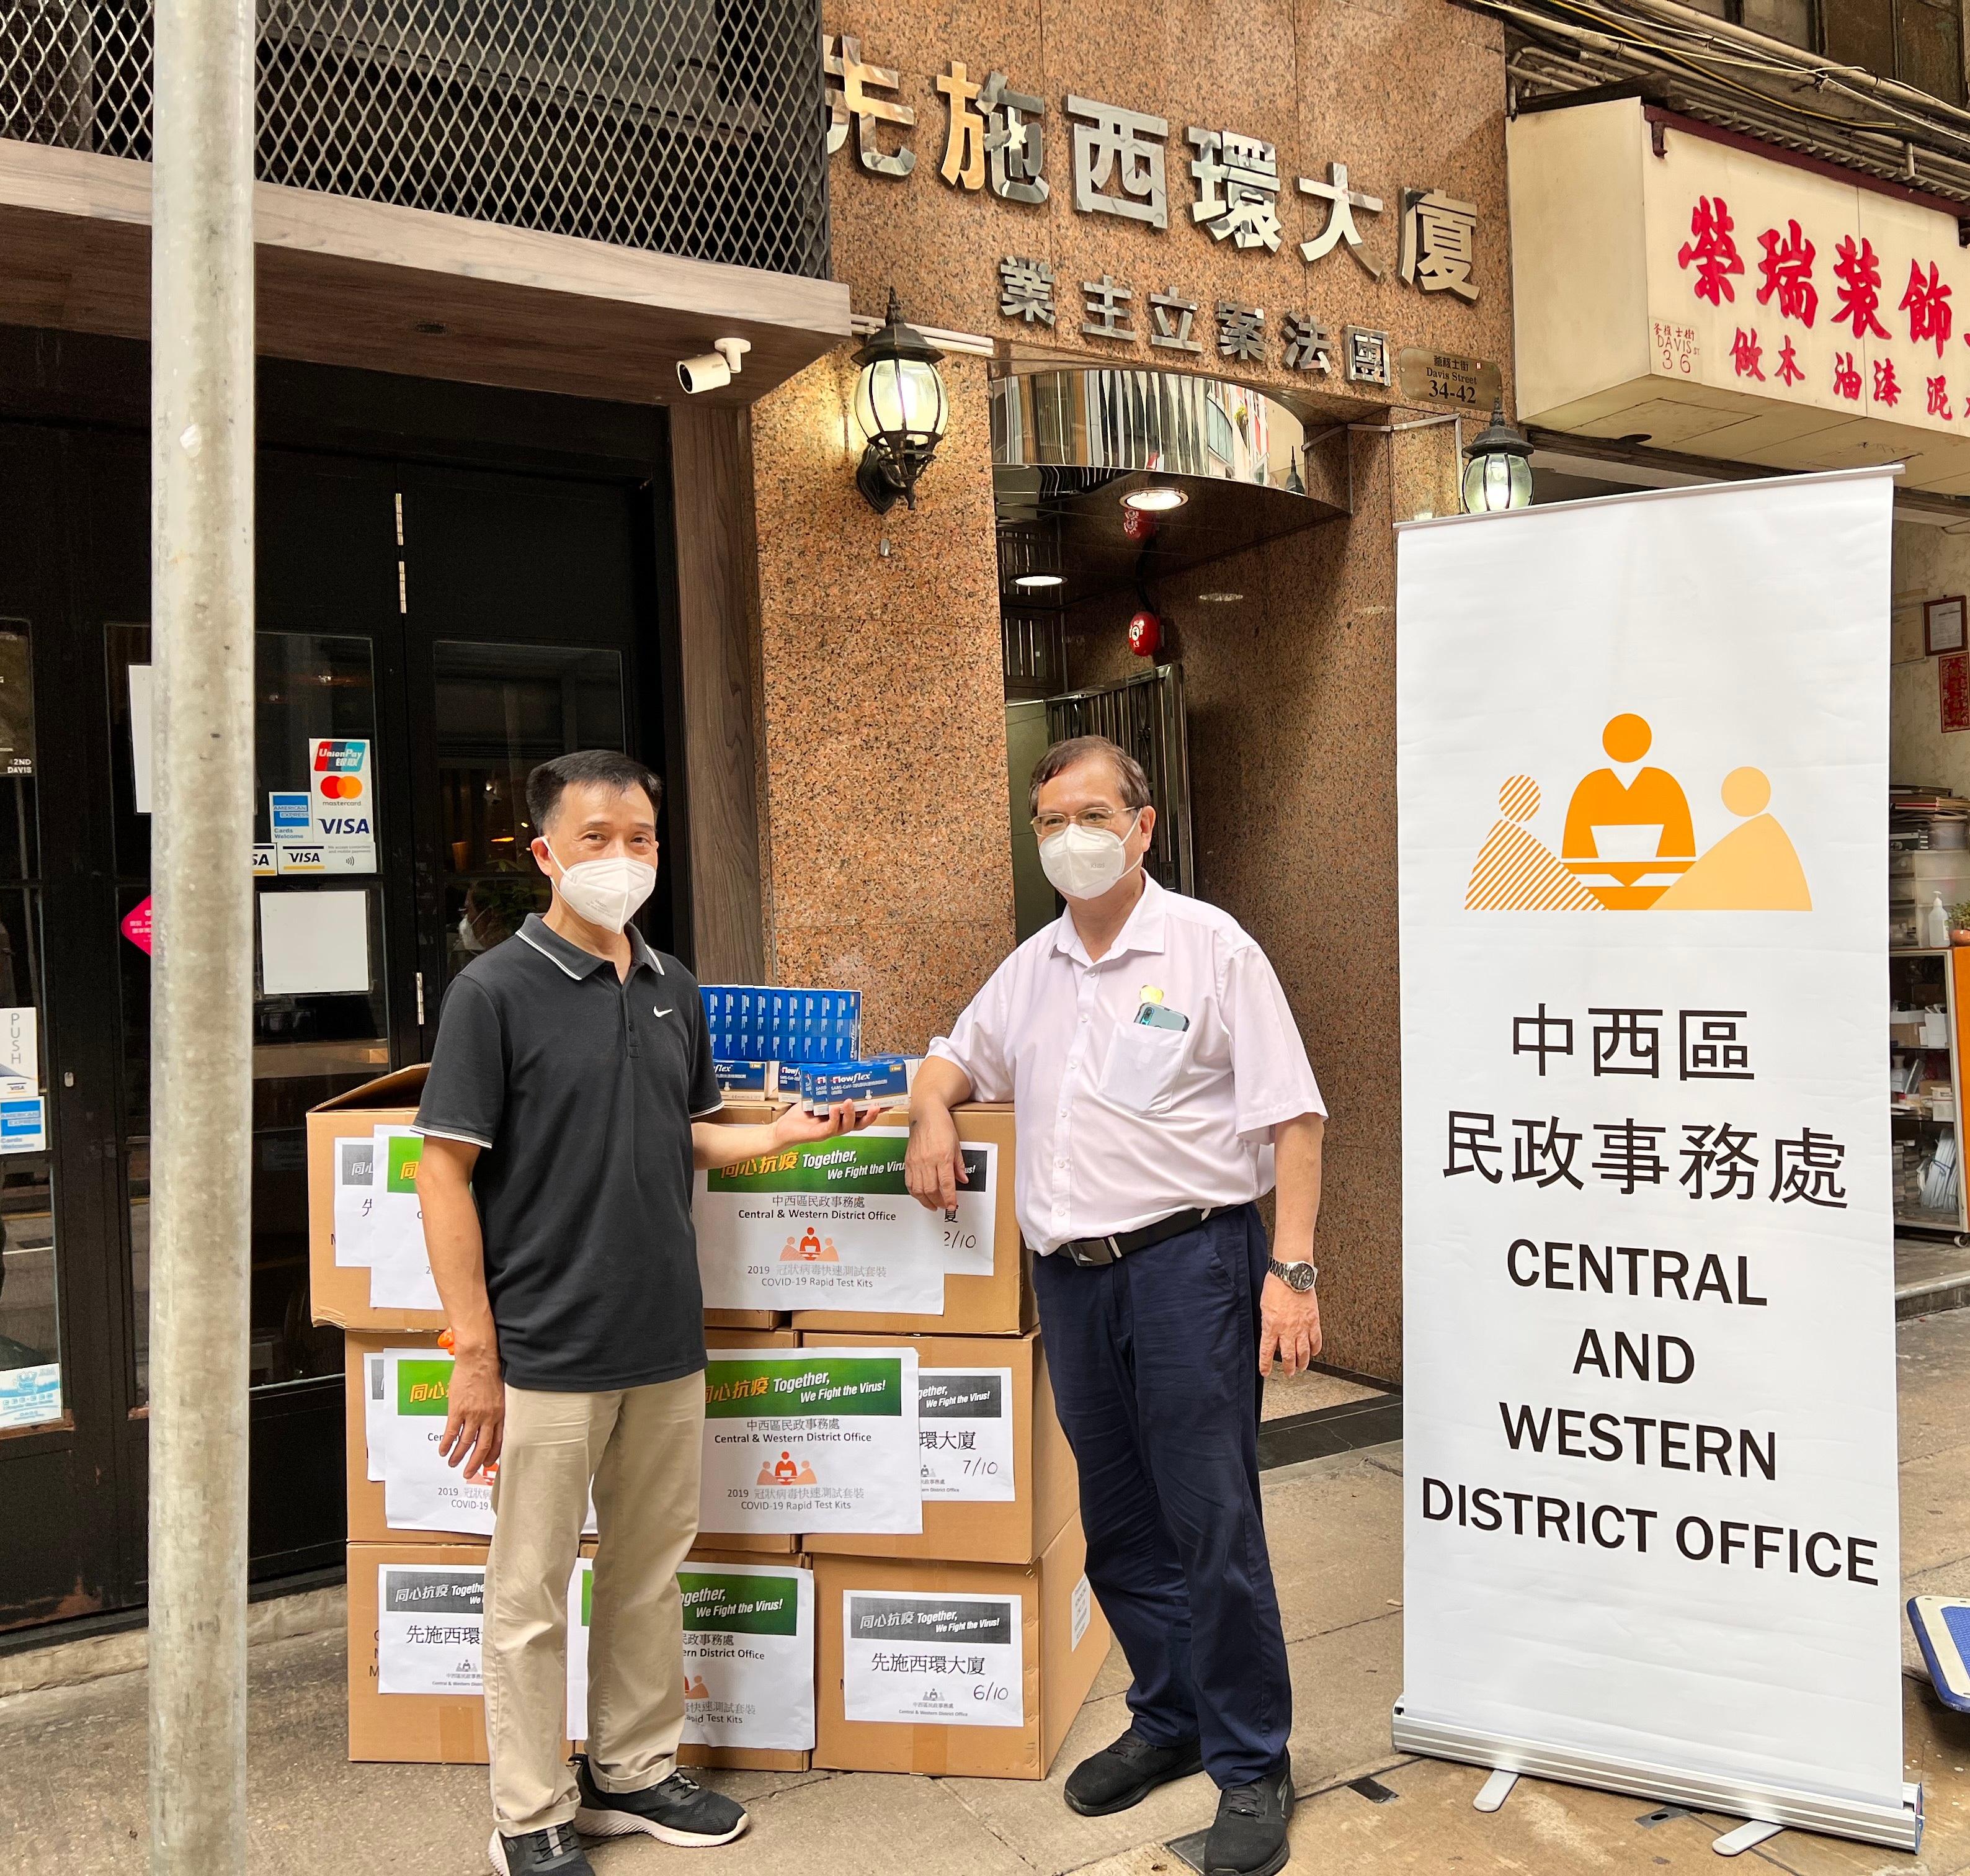 The Central and Western District Office today (June 15) distributed COVID-19 rapid test kits to households, cleansing workers and property management staff living and working in Sincere Western House for voluntary testing through the property management company.